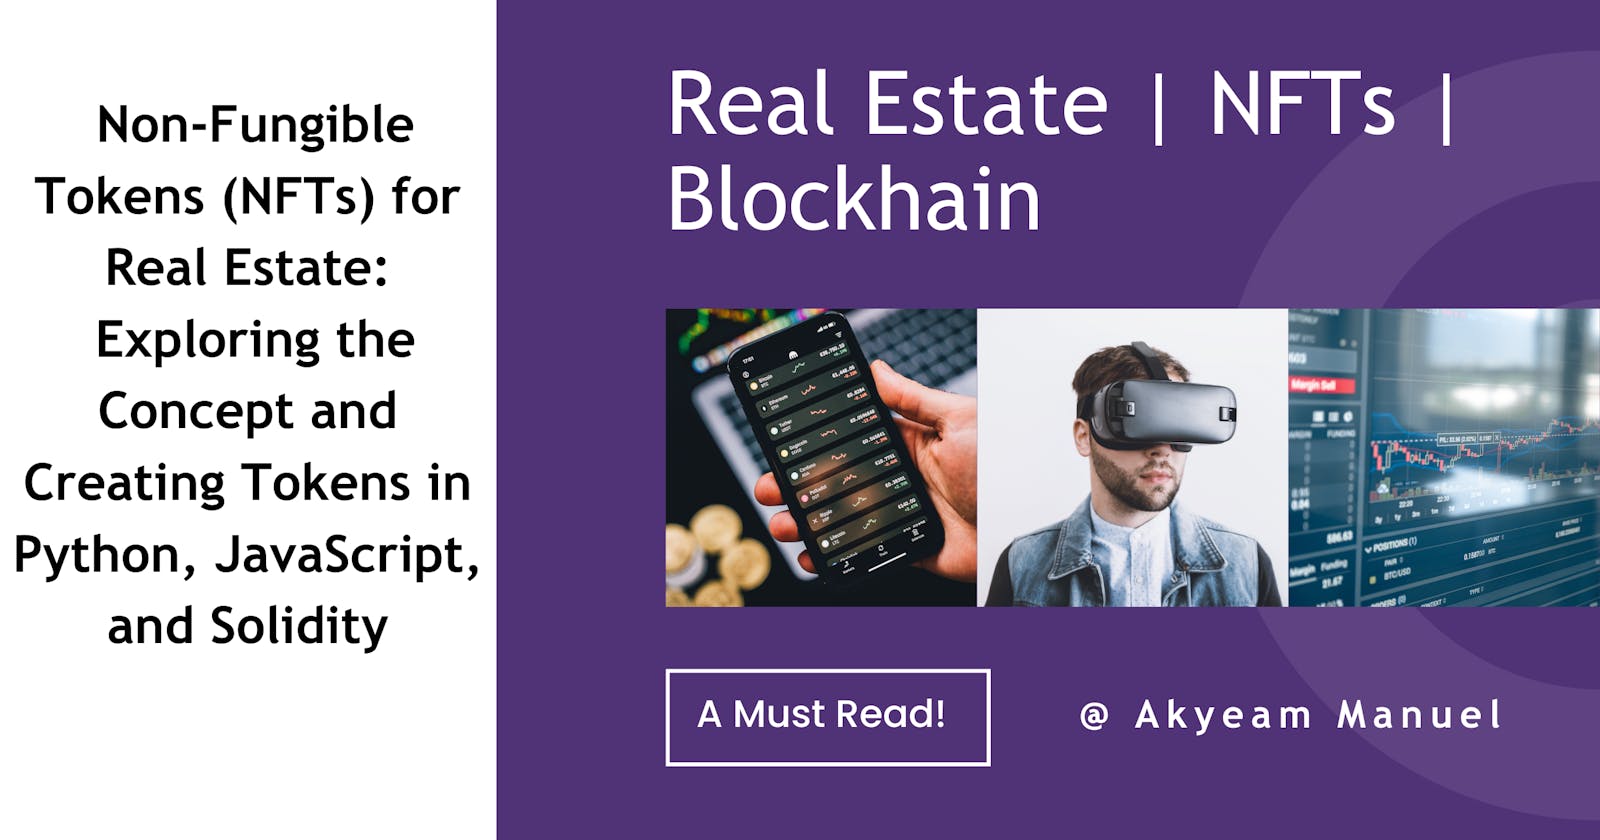 NFTs for Real Estate: A Step-by-Step Guide to Creating Tokens in Python, JavaScript, and Solidity